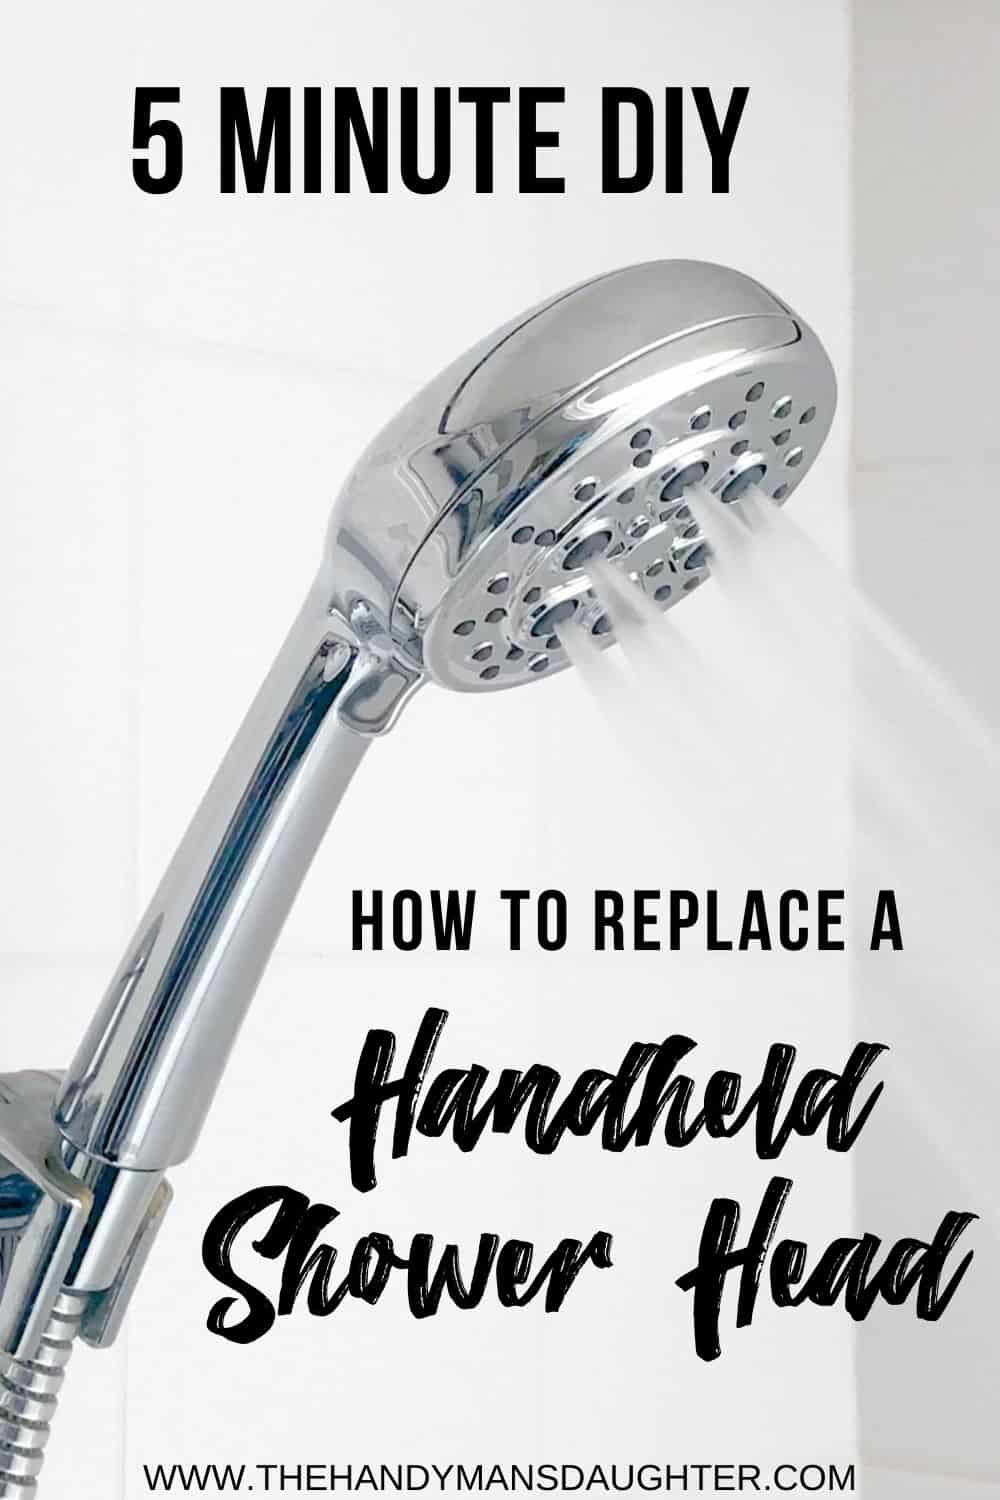 How to Replace a Handheld Shower Head - The Handyman's Daughter